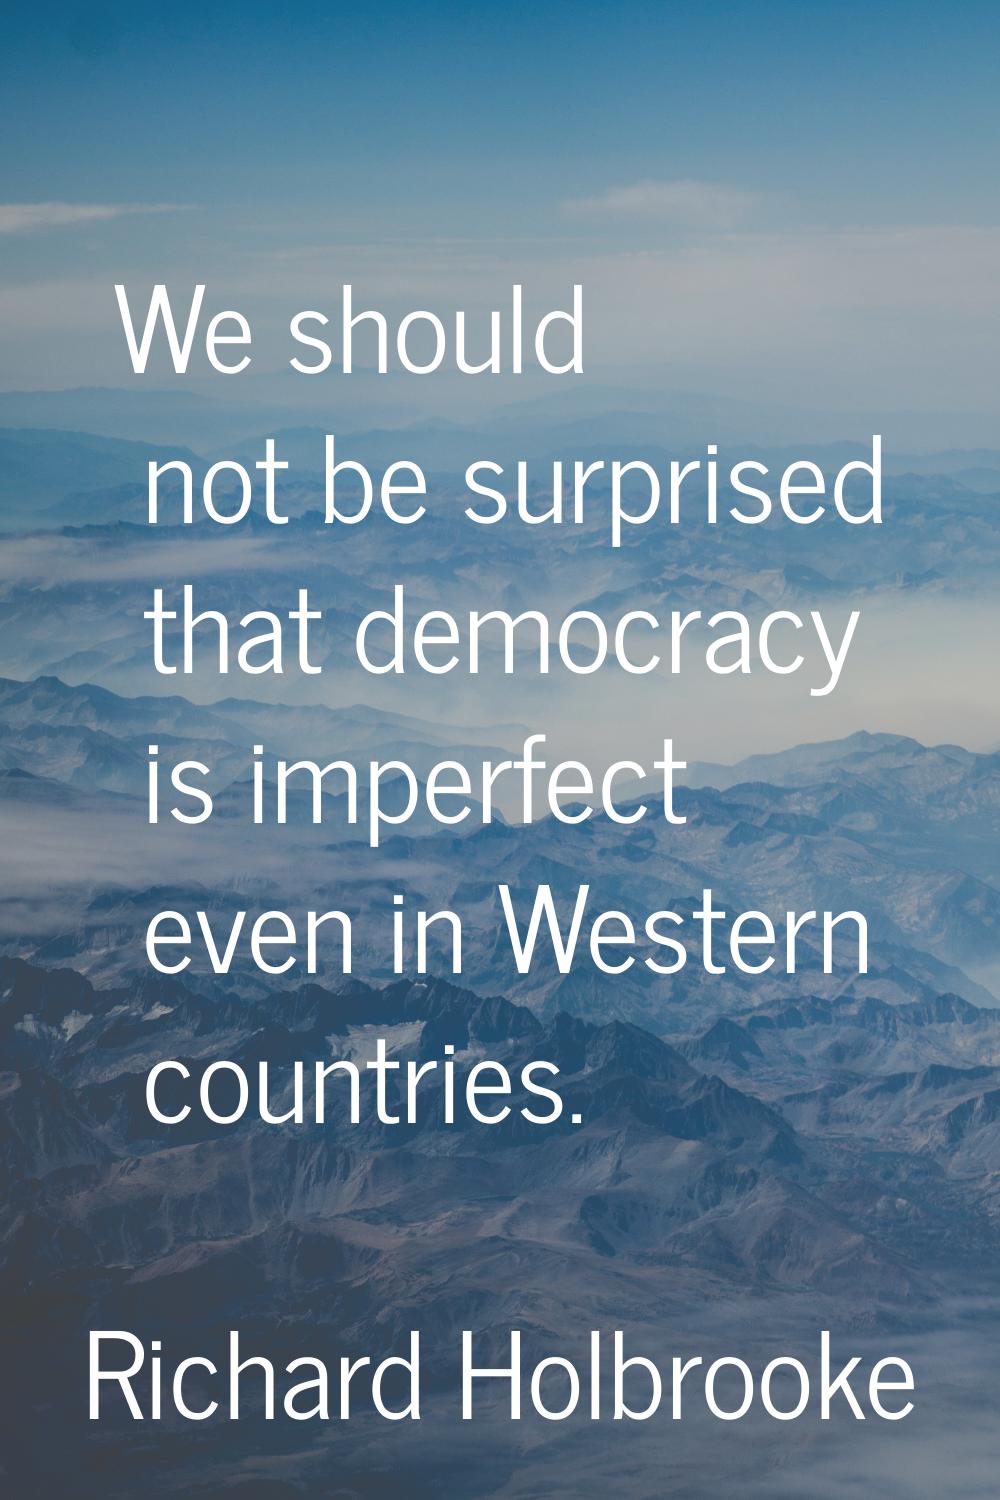 We should not be surprised that democracy is imperfect even in Western countries.